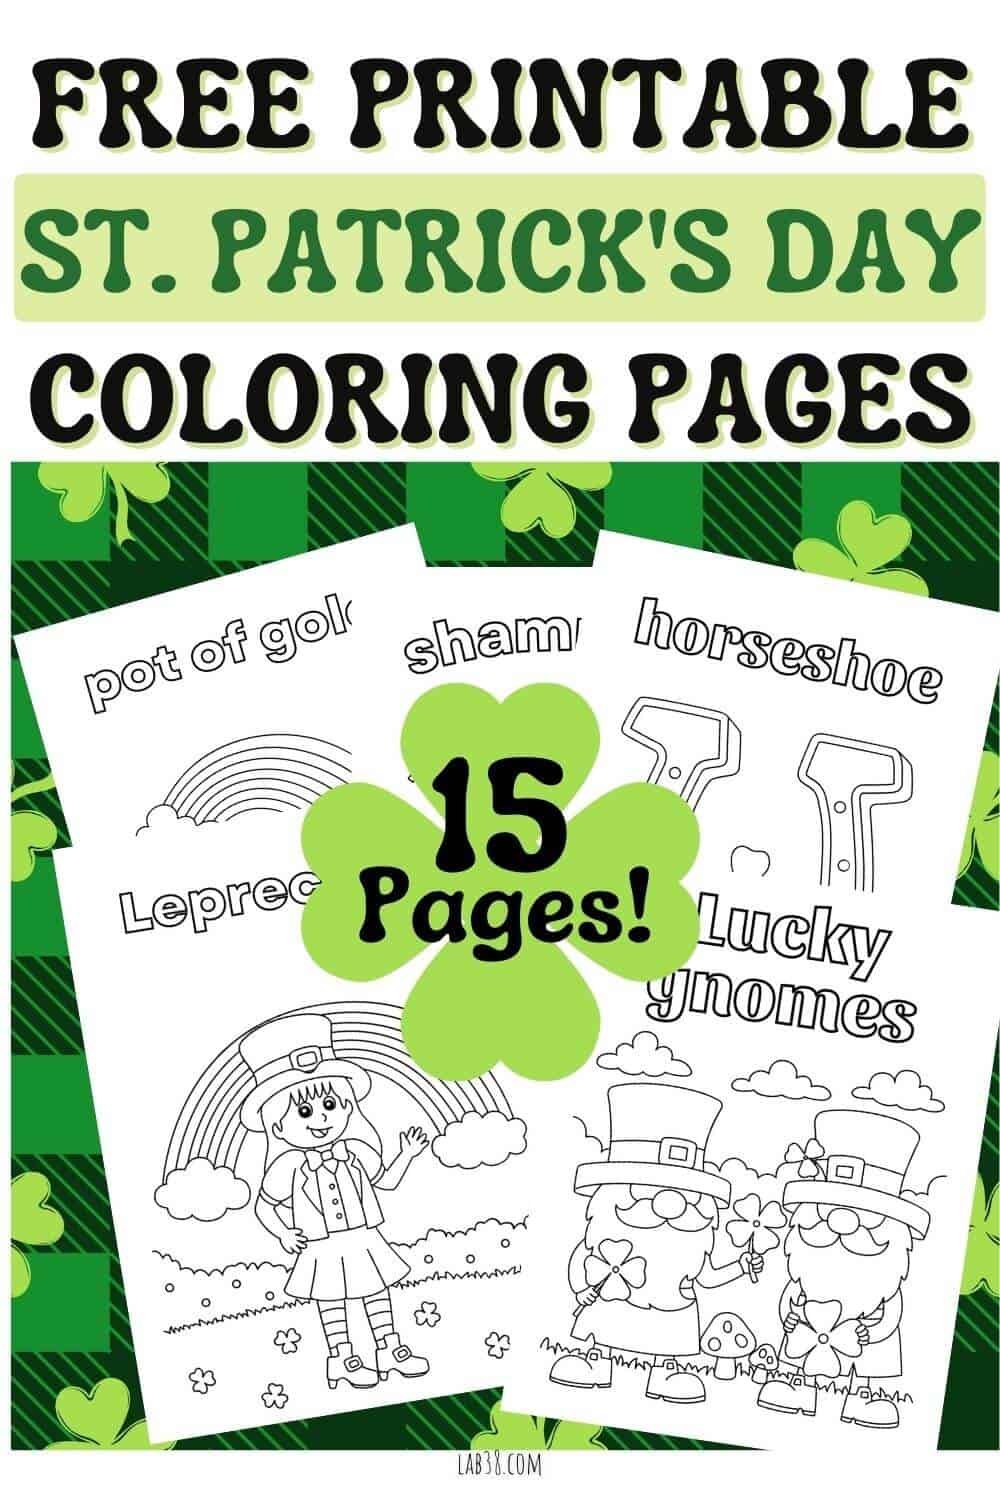 Free Printable St. Patrick's Day Coloring Pages for Kids 1000 x 1500